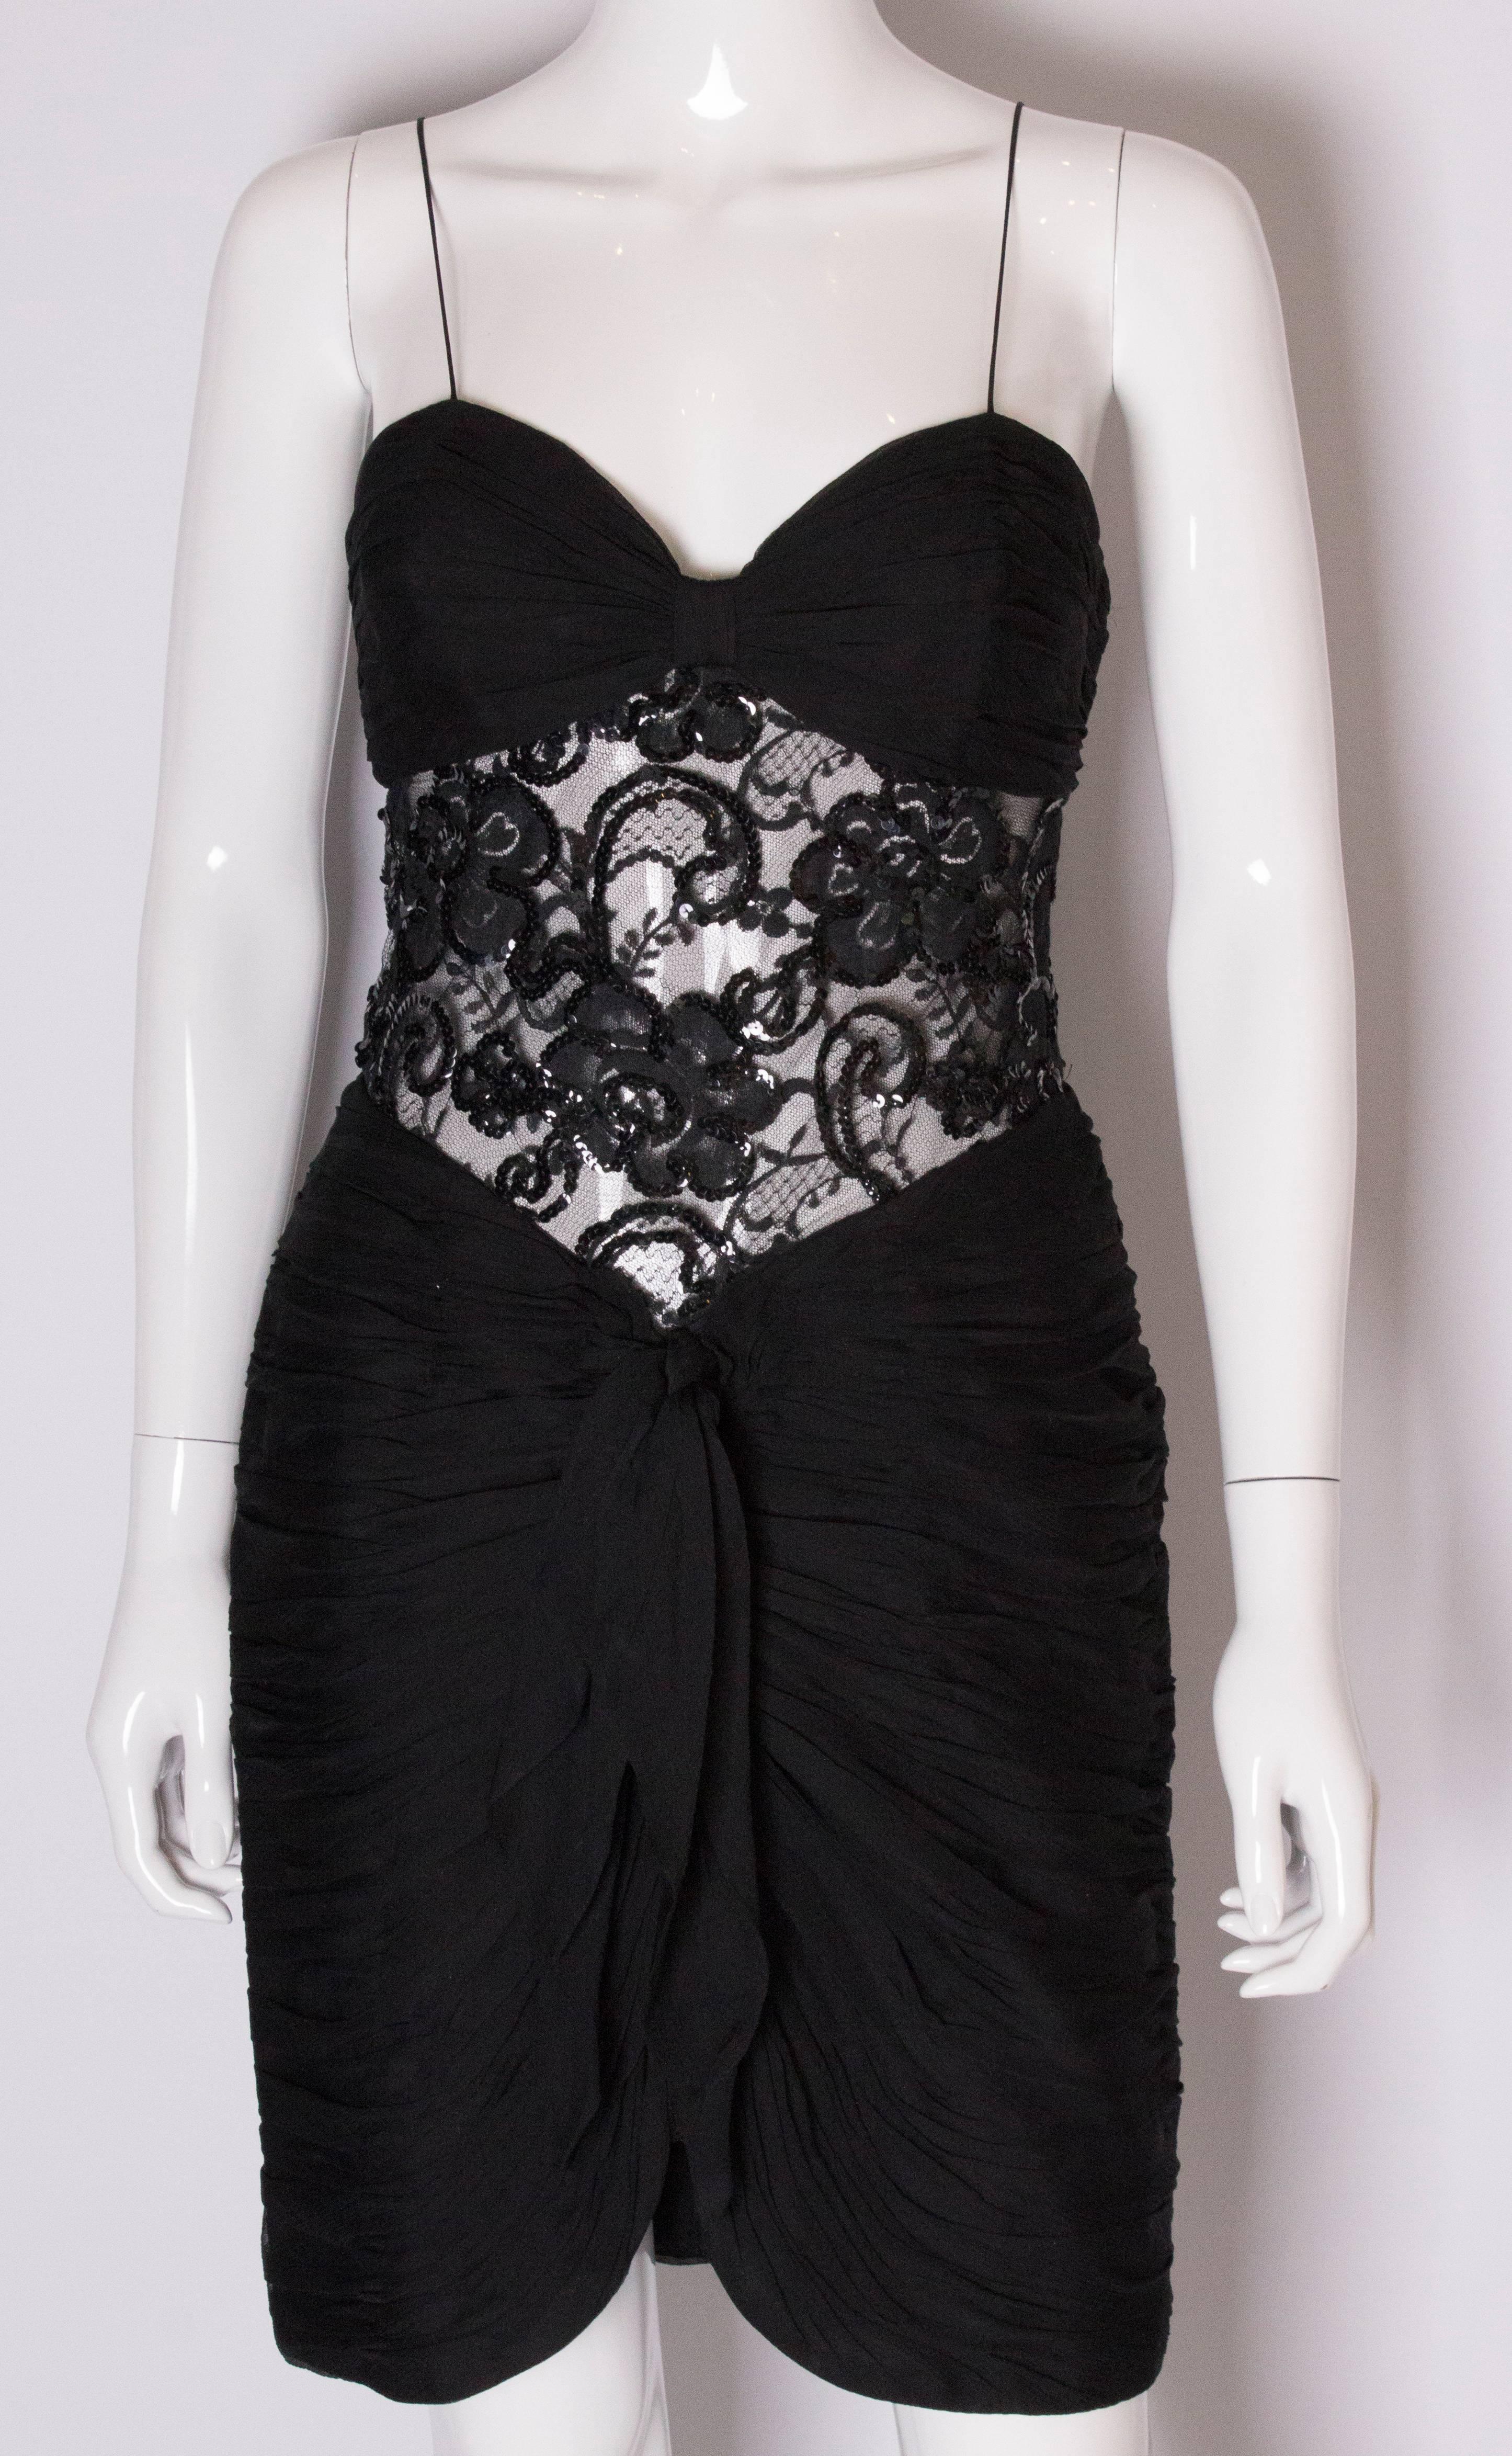 A chic cocktail dress by British designer Bellville Sassoon. In a black silk chiffon with lace panels, front and back the dress is a real head turner. The dress has a central back zip and spagetti straps.